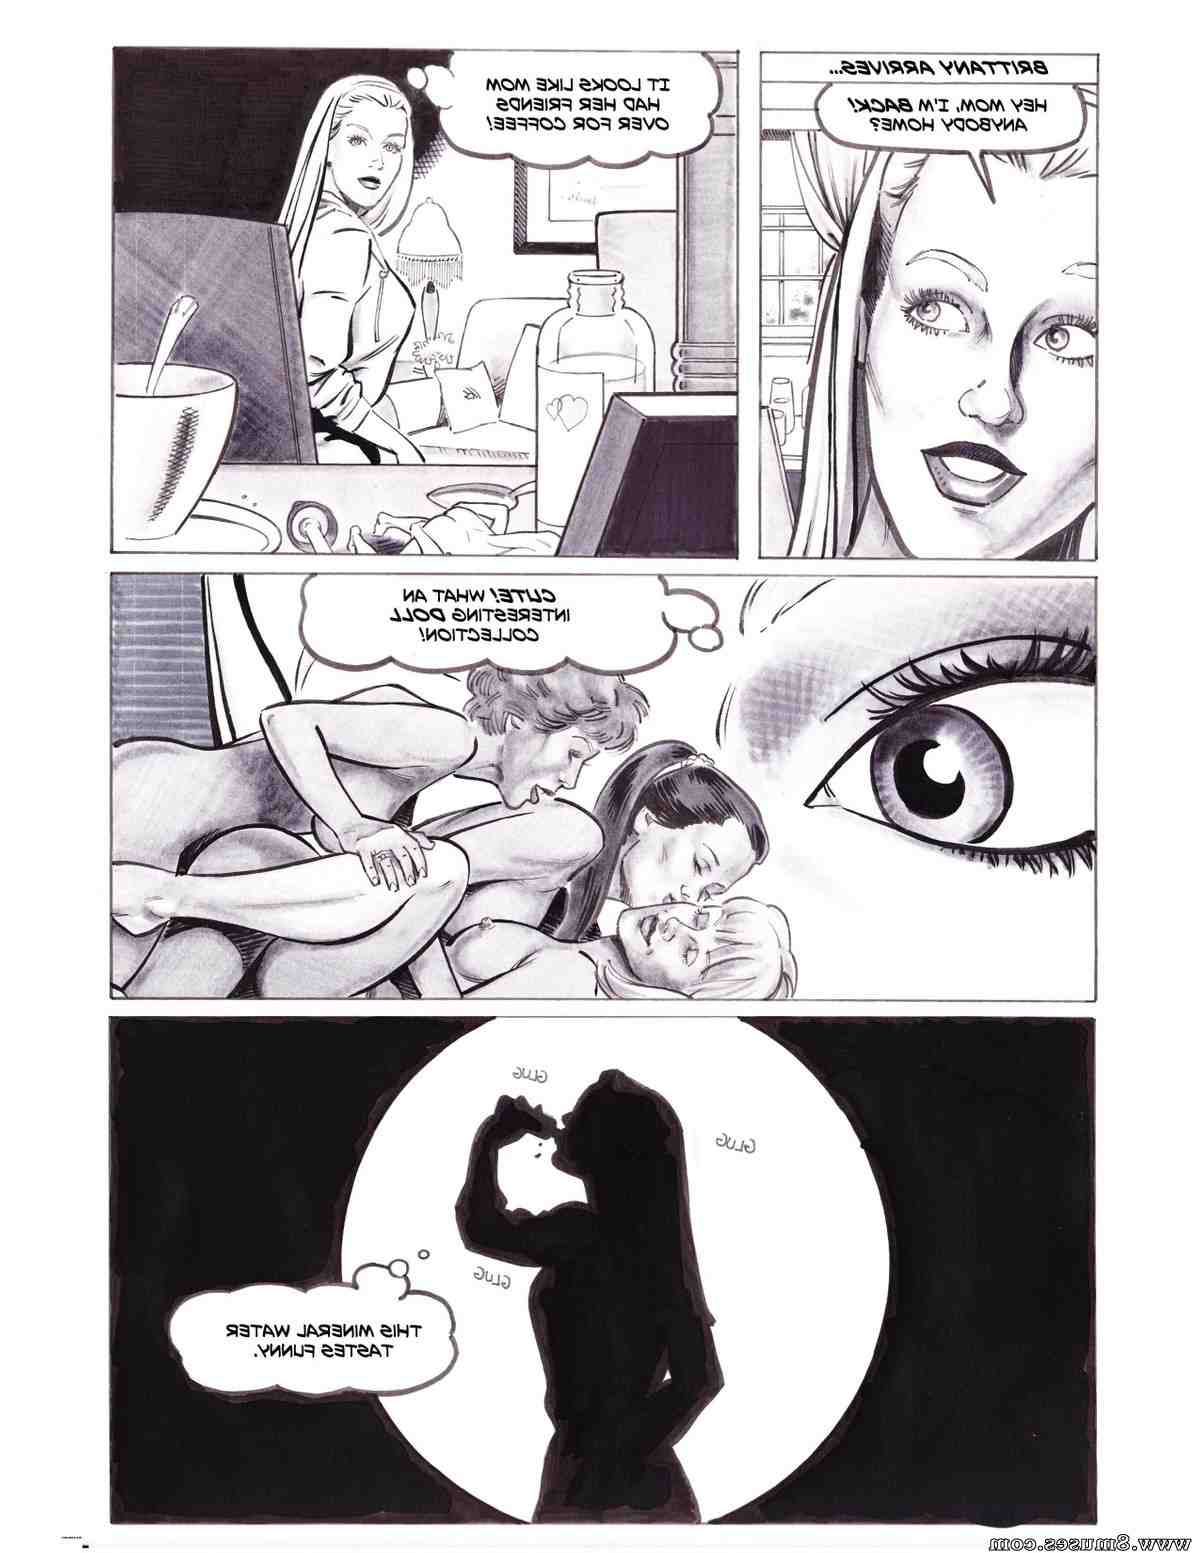 DreamTales-Comics/College-Bound College_Bound__8muses_-_Sex_and_Porn_Comics_16.jpg